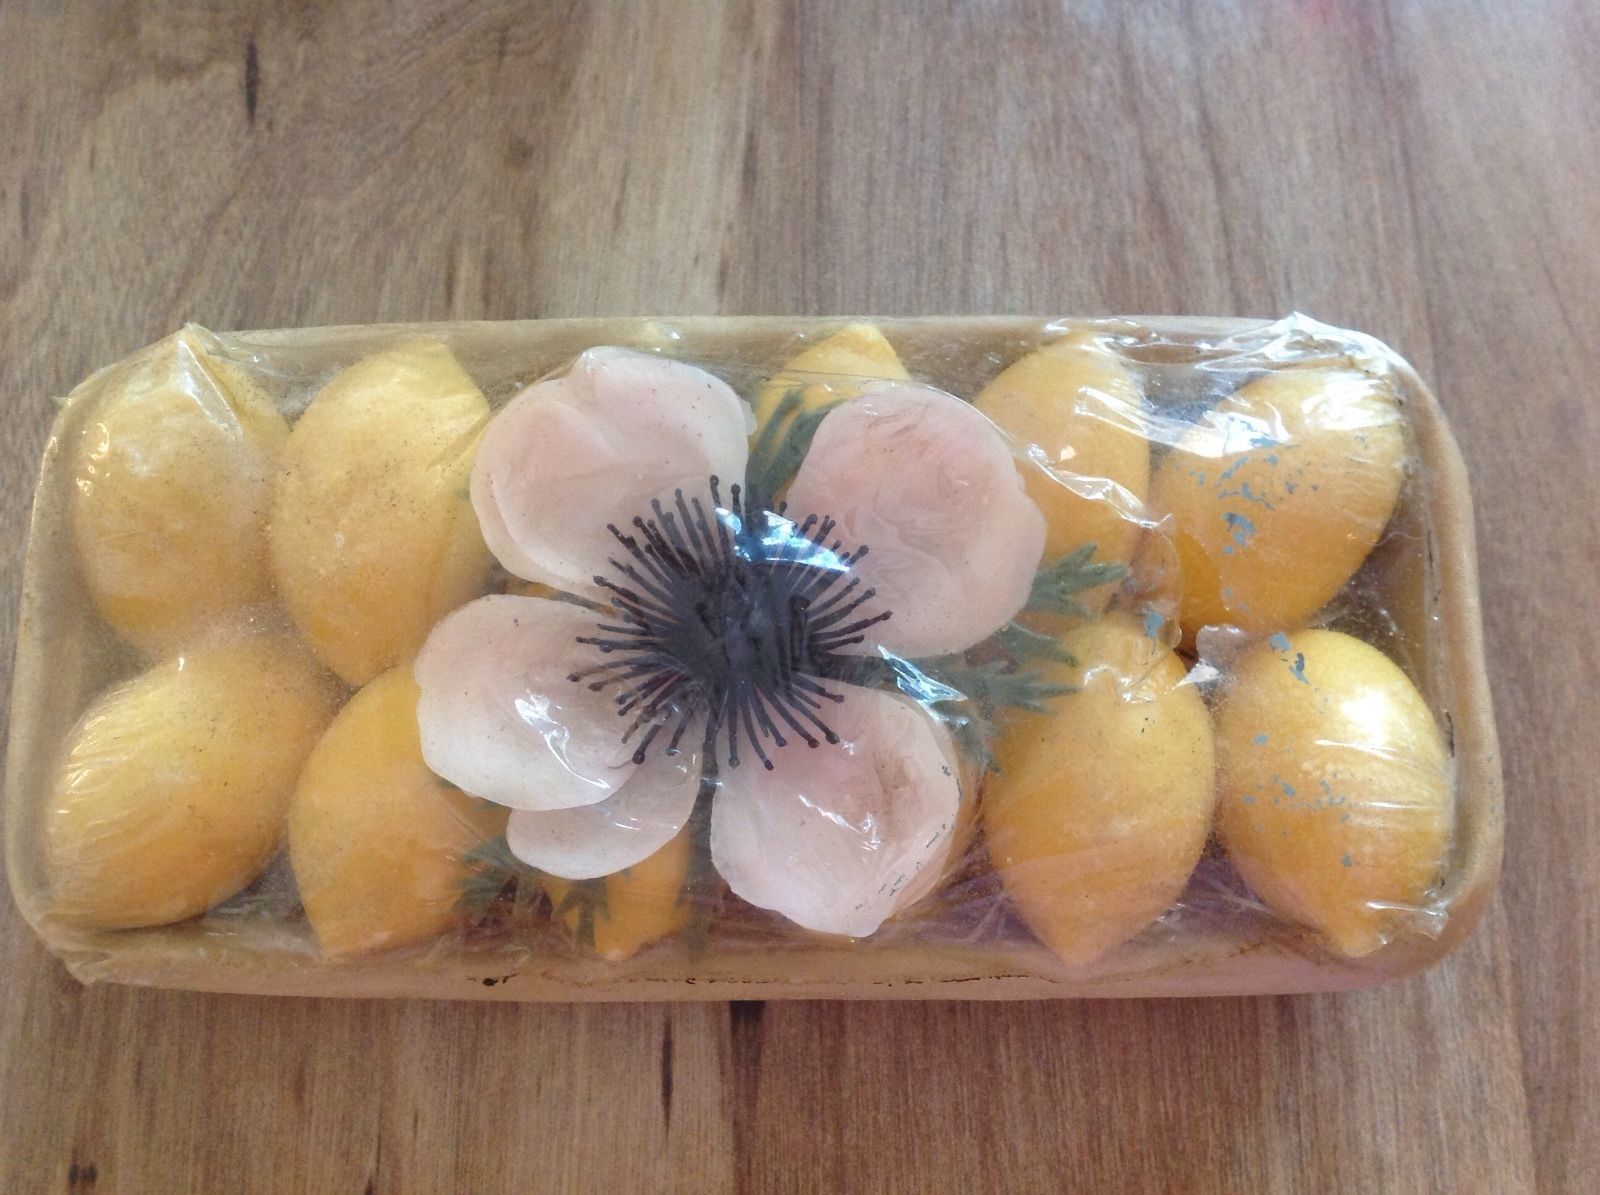 Vintage 1960s Package of Lemon Scented Soap, 12 cakes New with plastic flower - $10.00